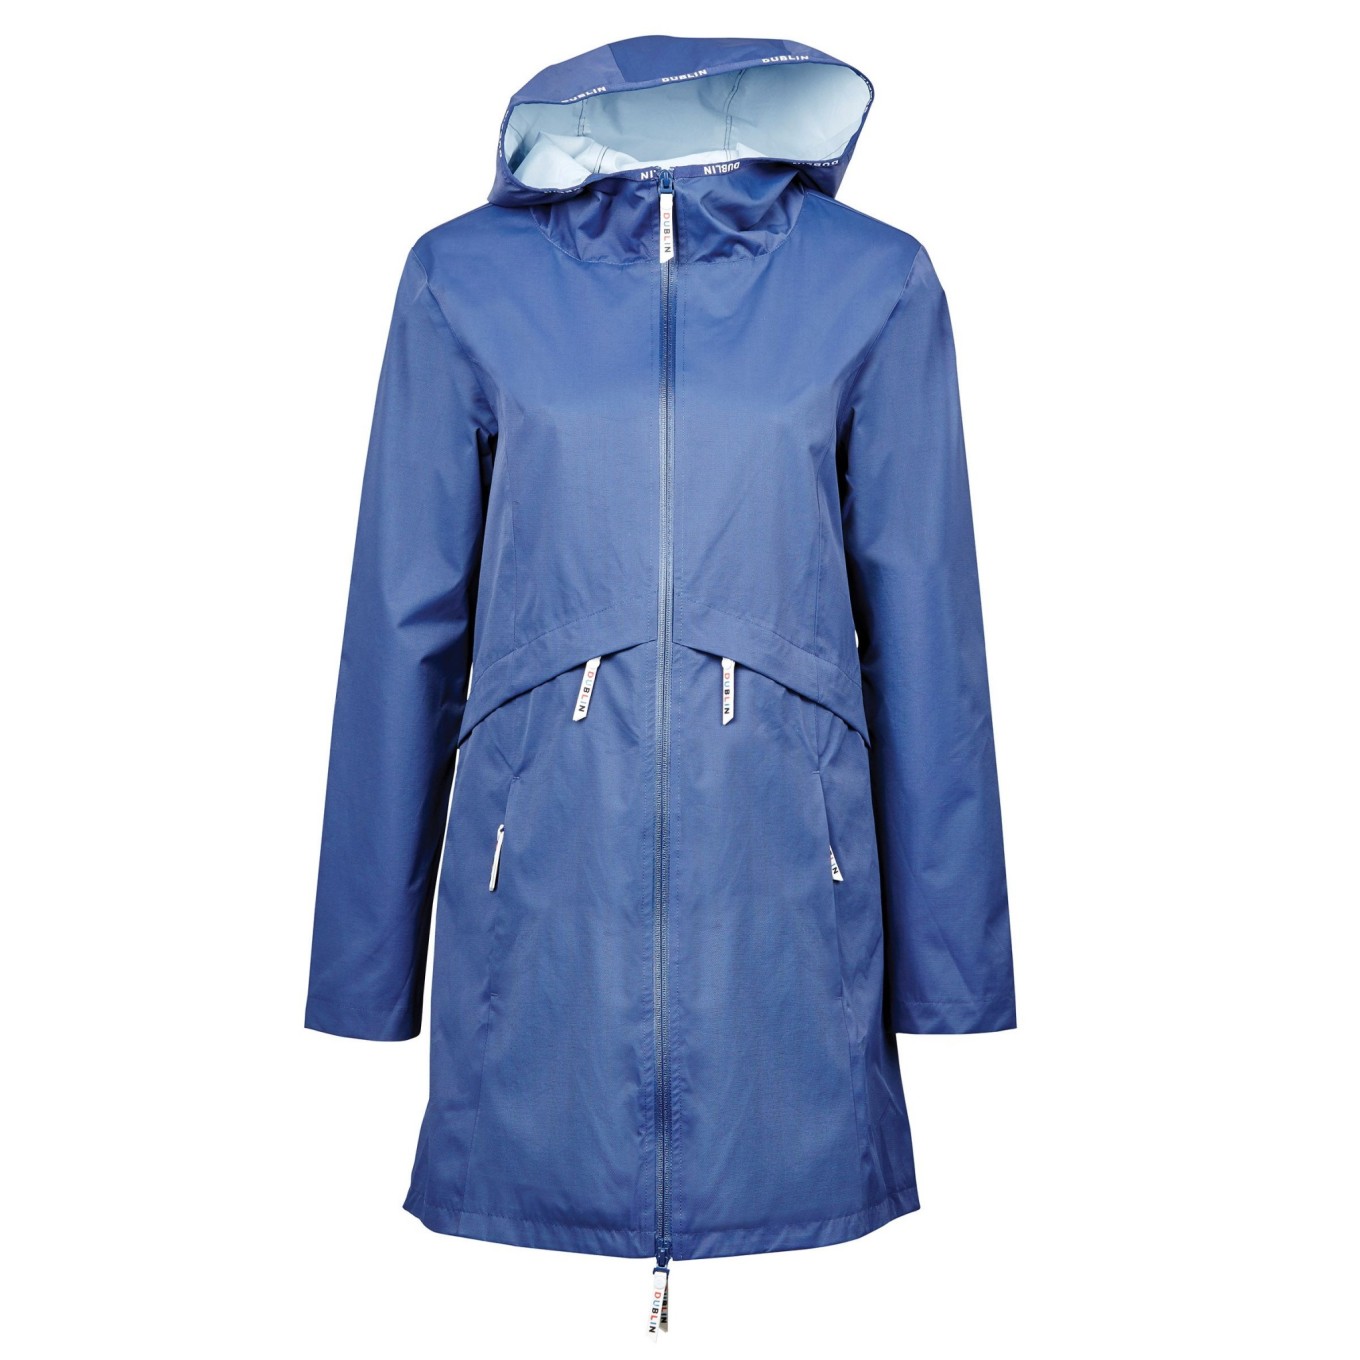 Waterproof lightweight trench coat in 2 layer fabric lined with airflo..